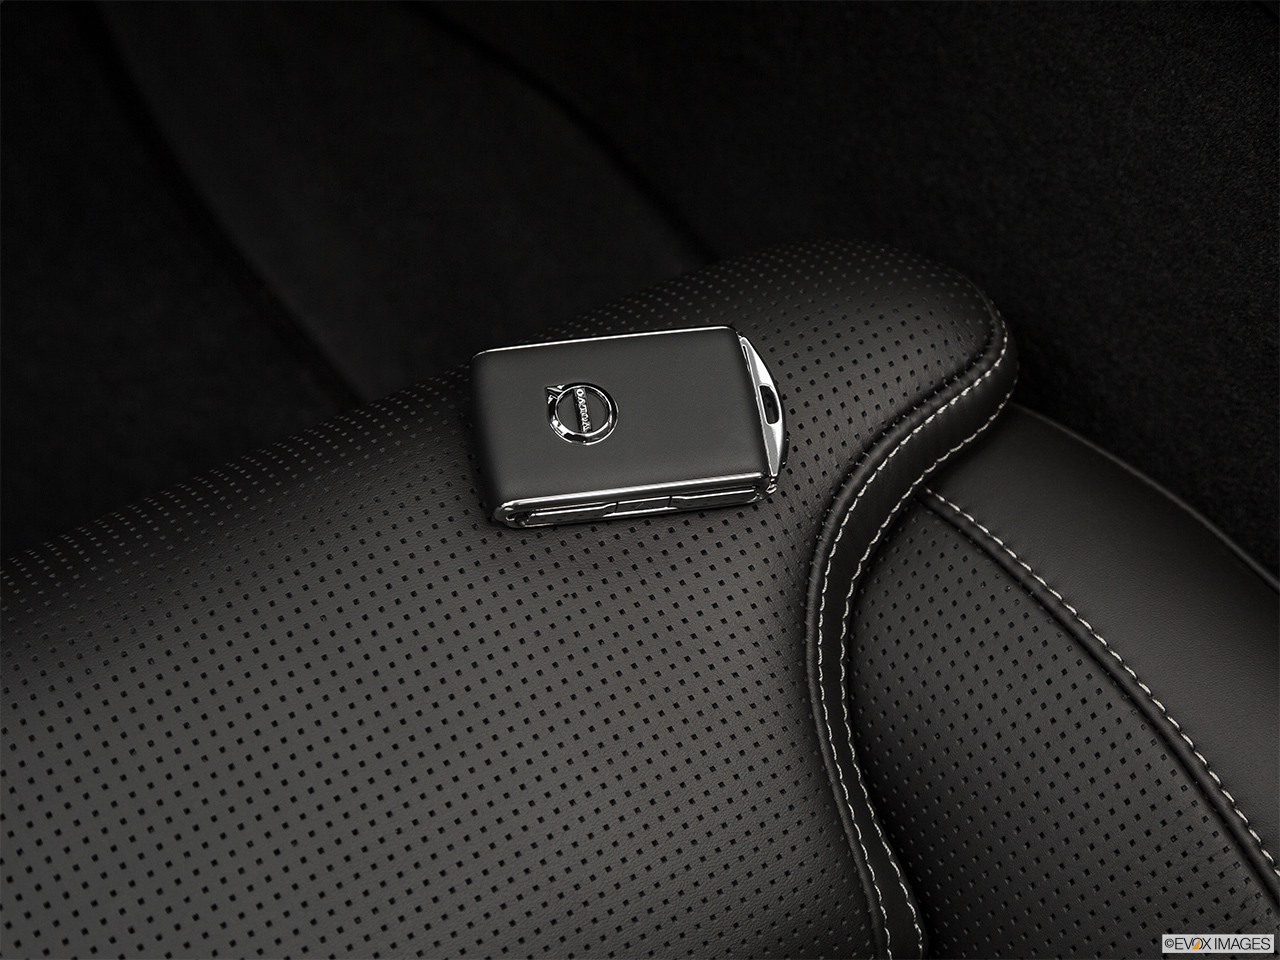 2017 Volvo S90 T6 Inscription Key fob on driver's seat. 